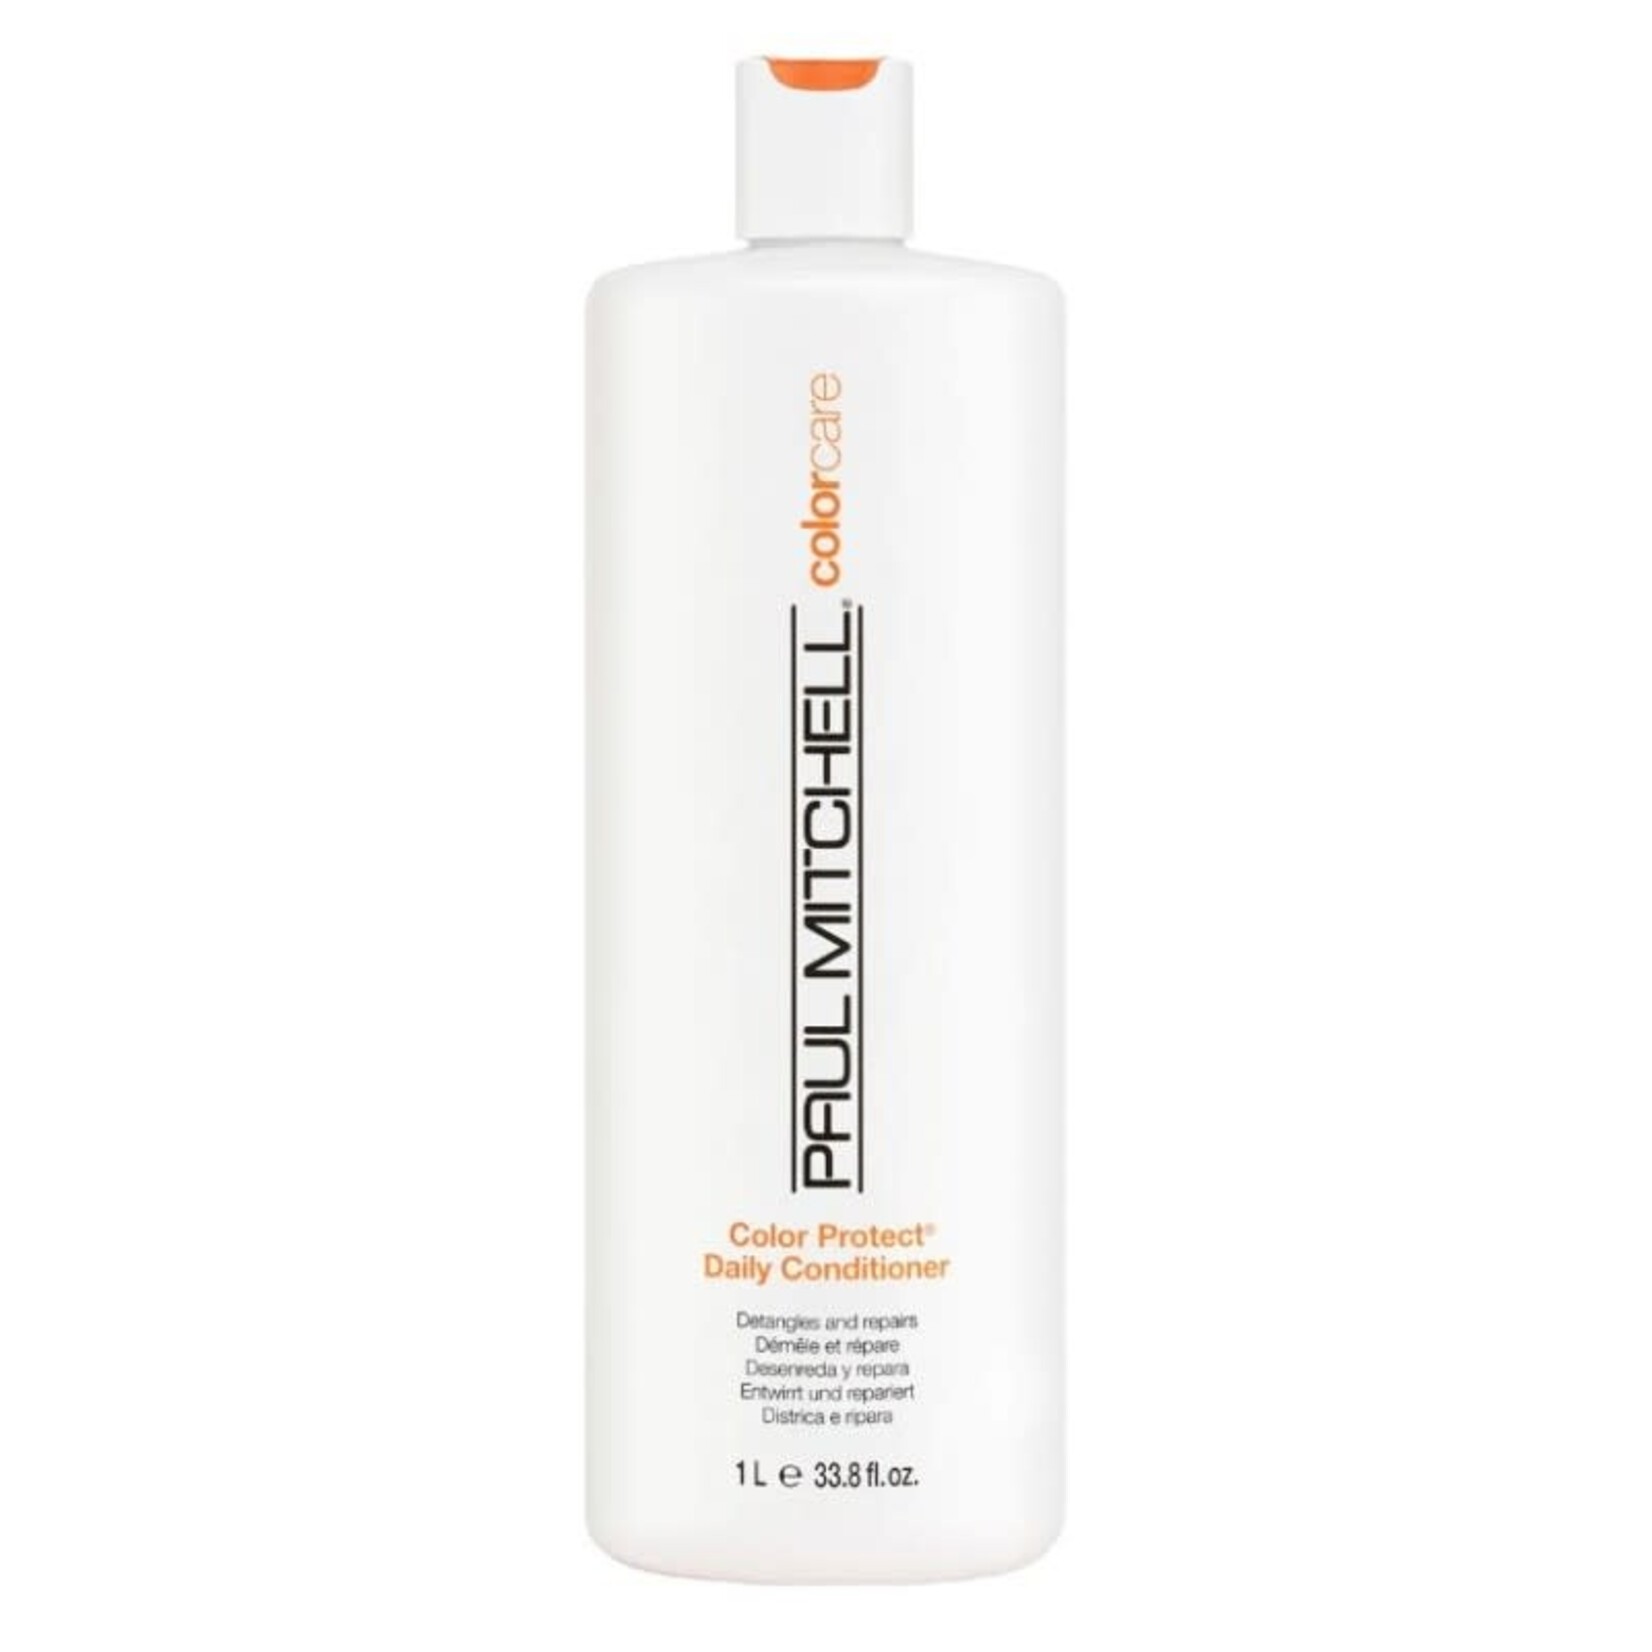 Paul Mitchell Paul Mitchell - Color Protect - Revitalisant Doux 1000ml